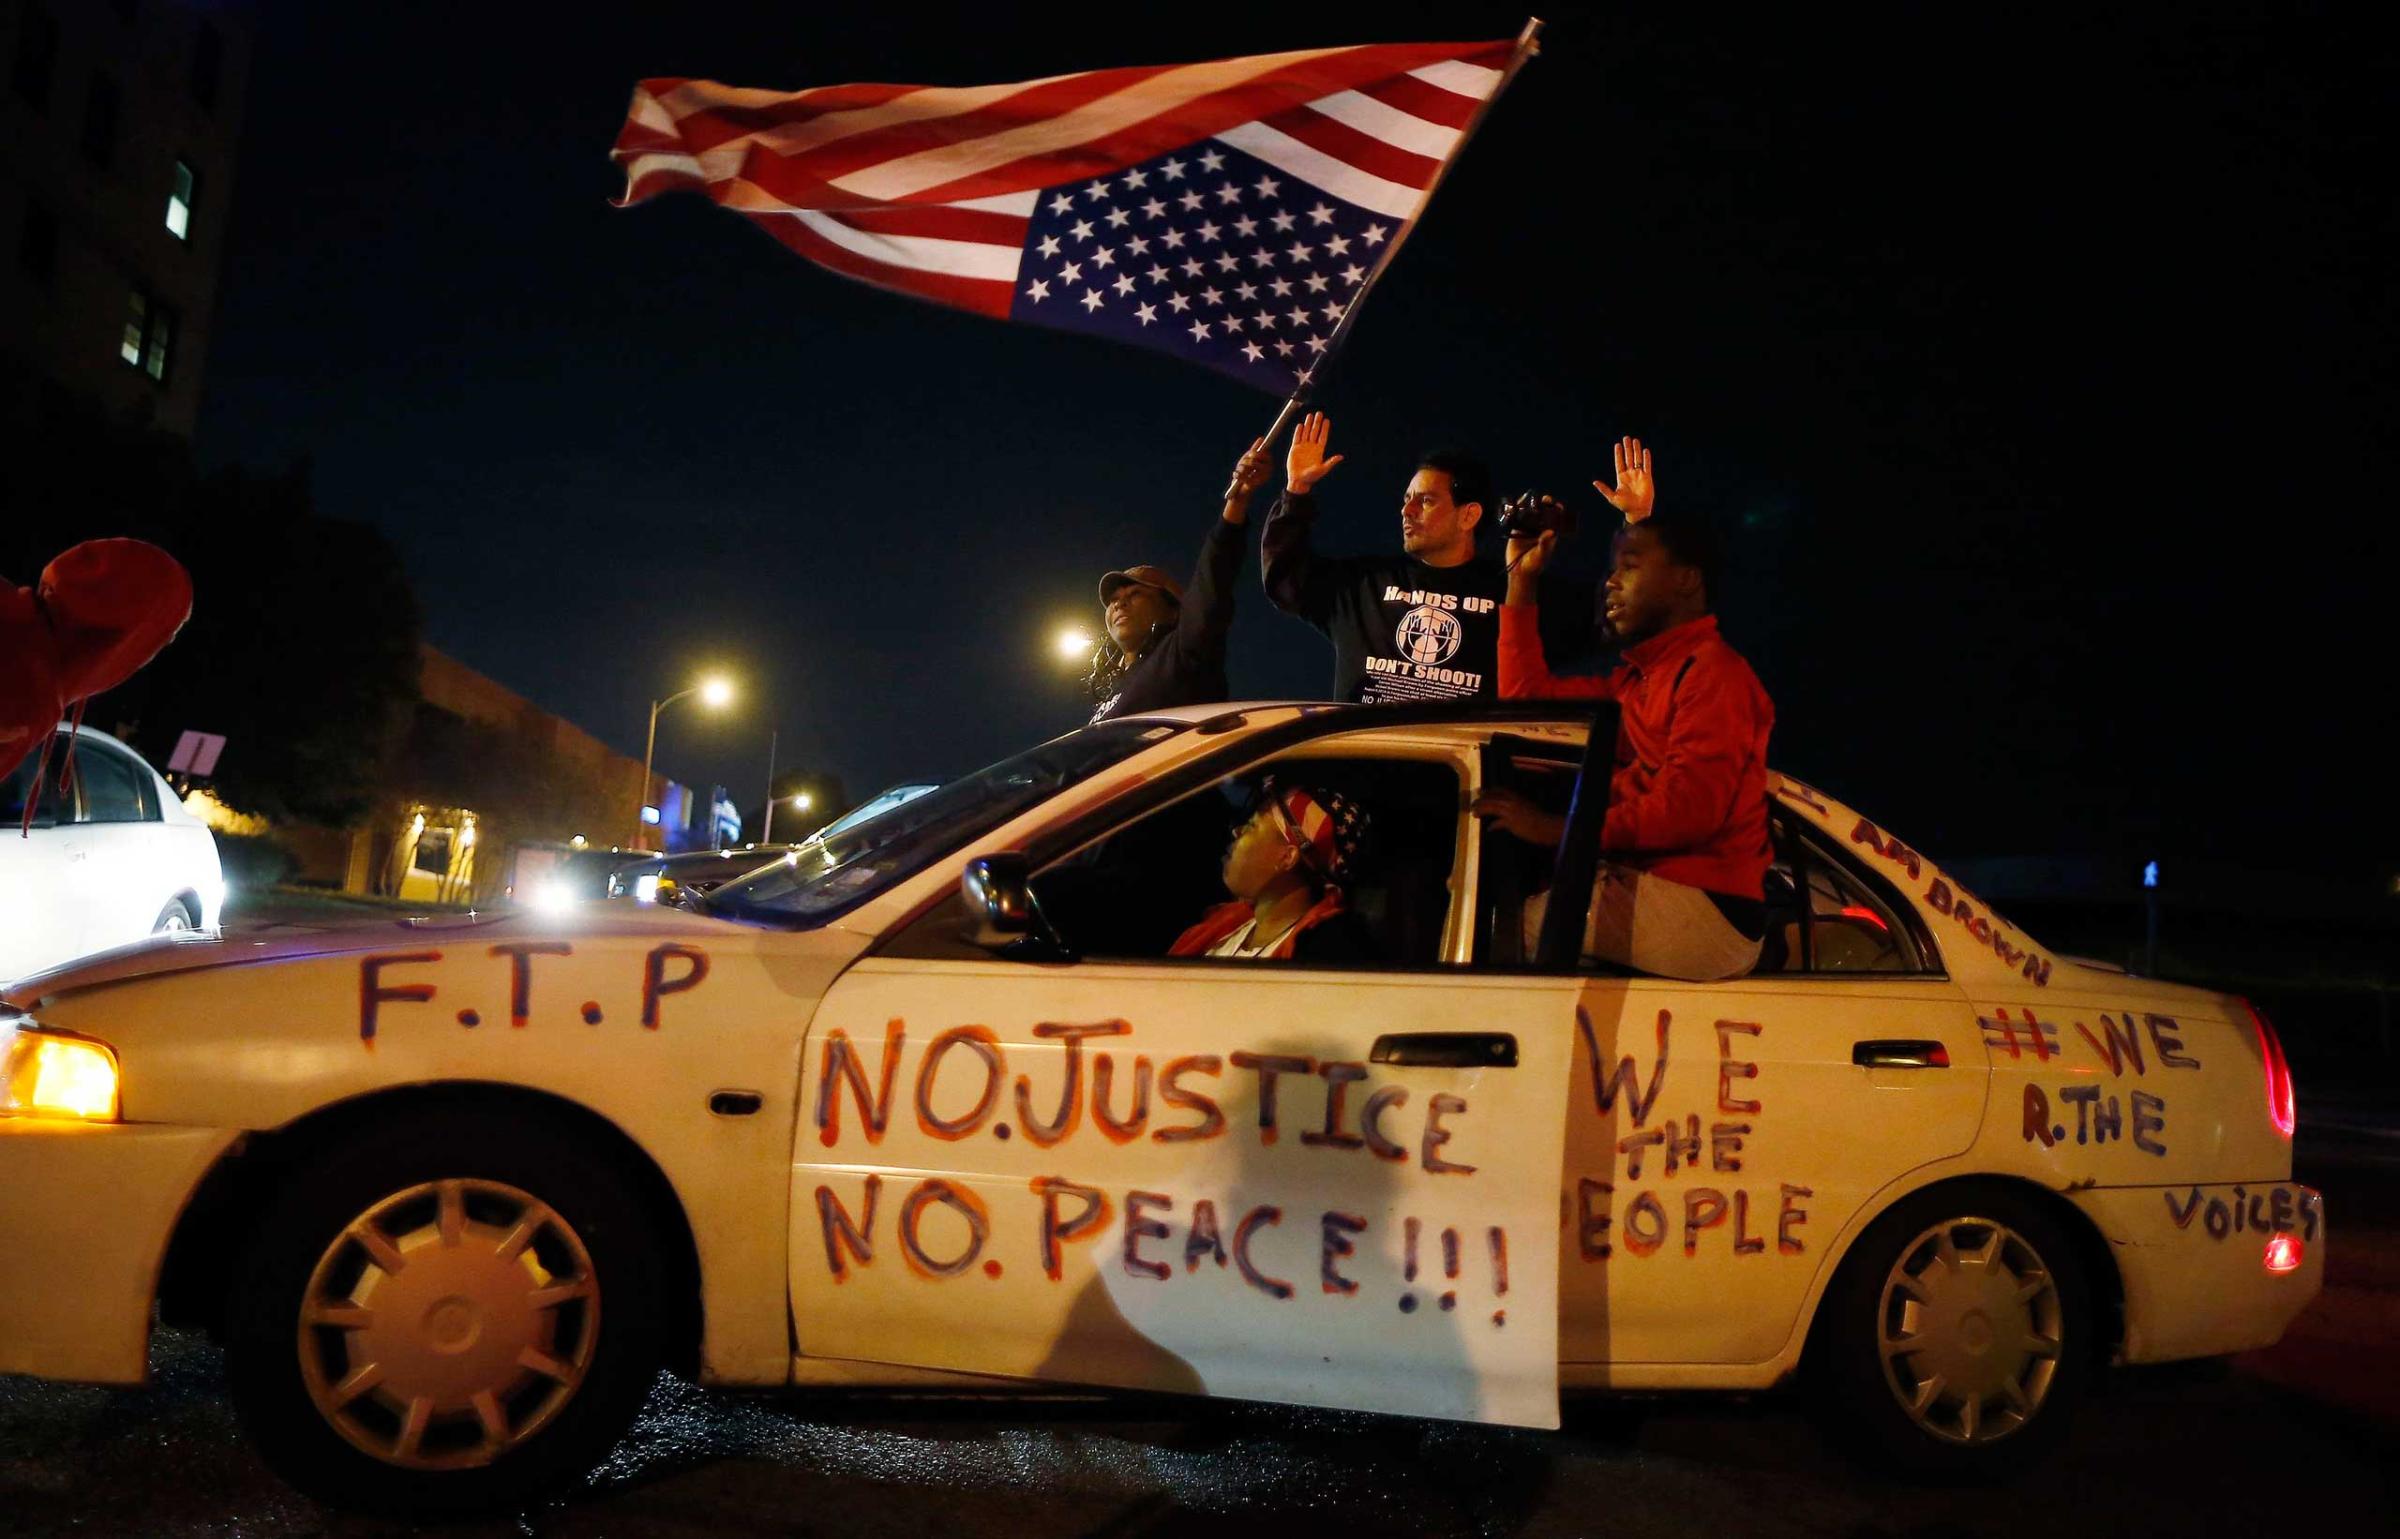 Protesters cheer after blocking an intersection after a vigil in St. Louis